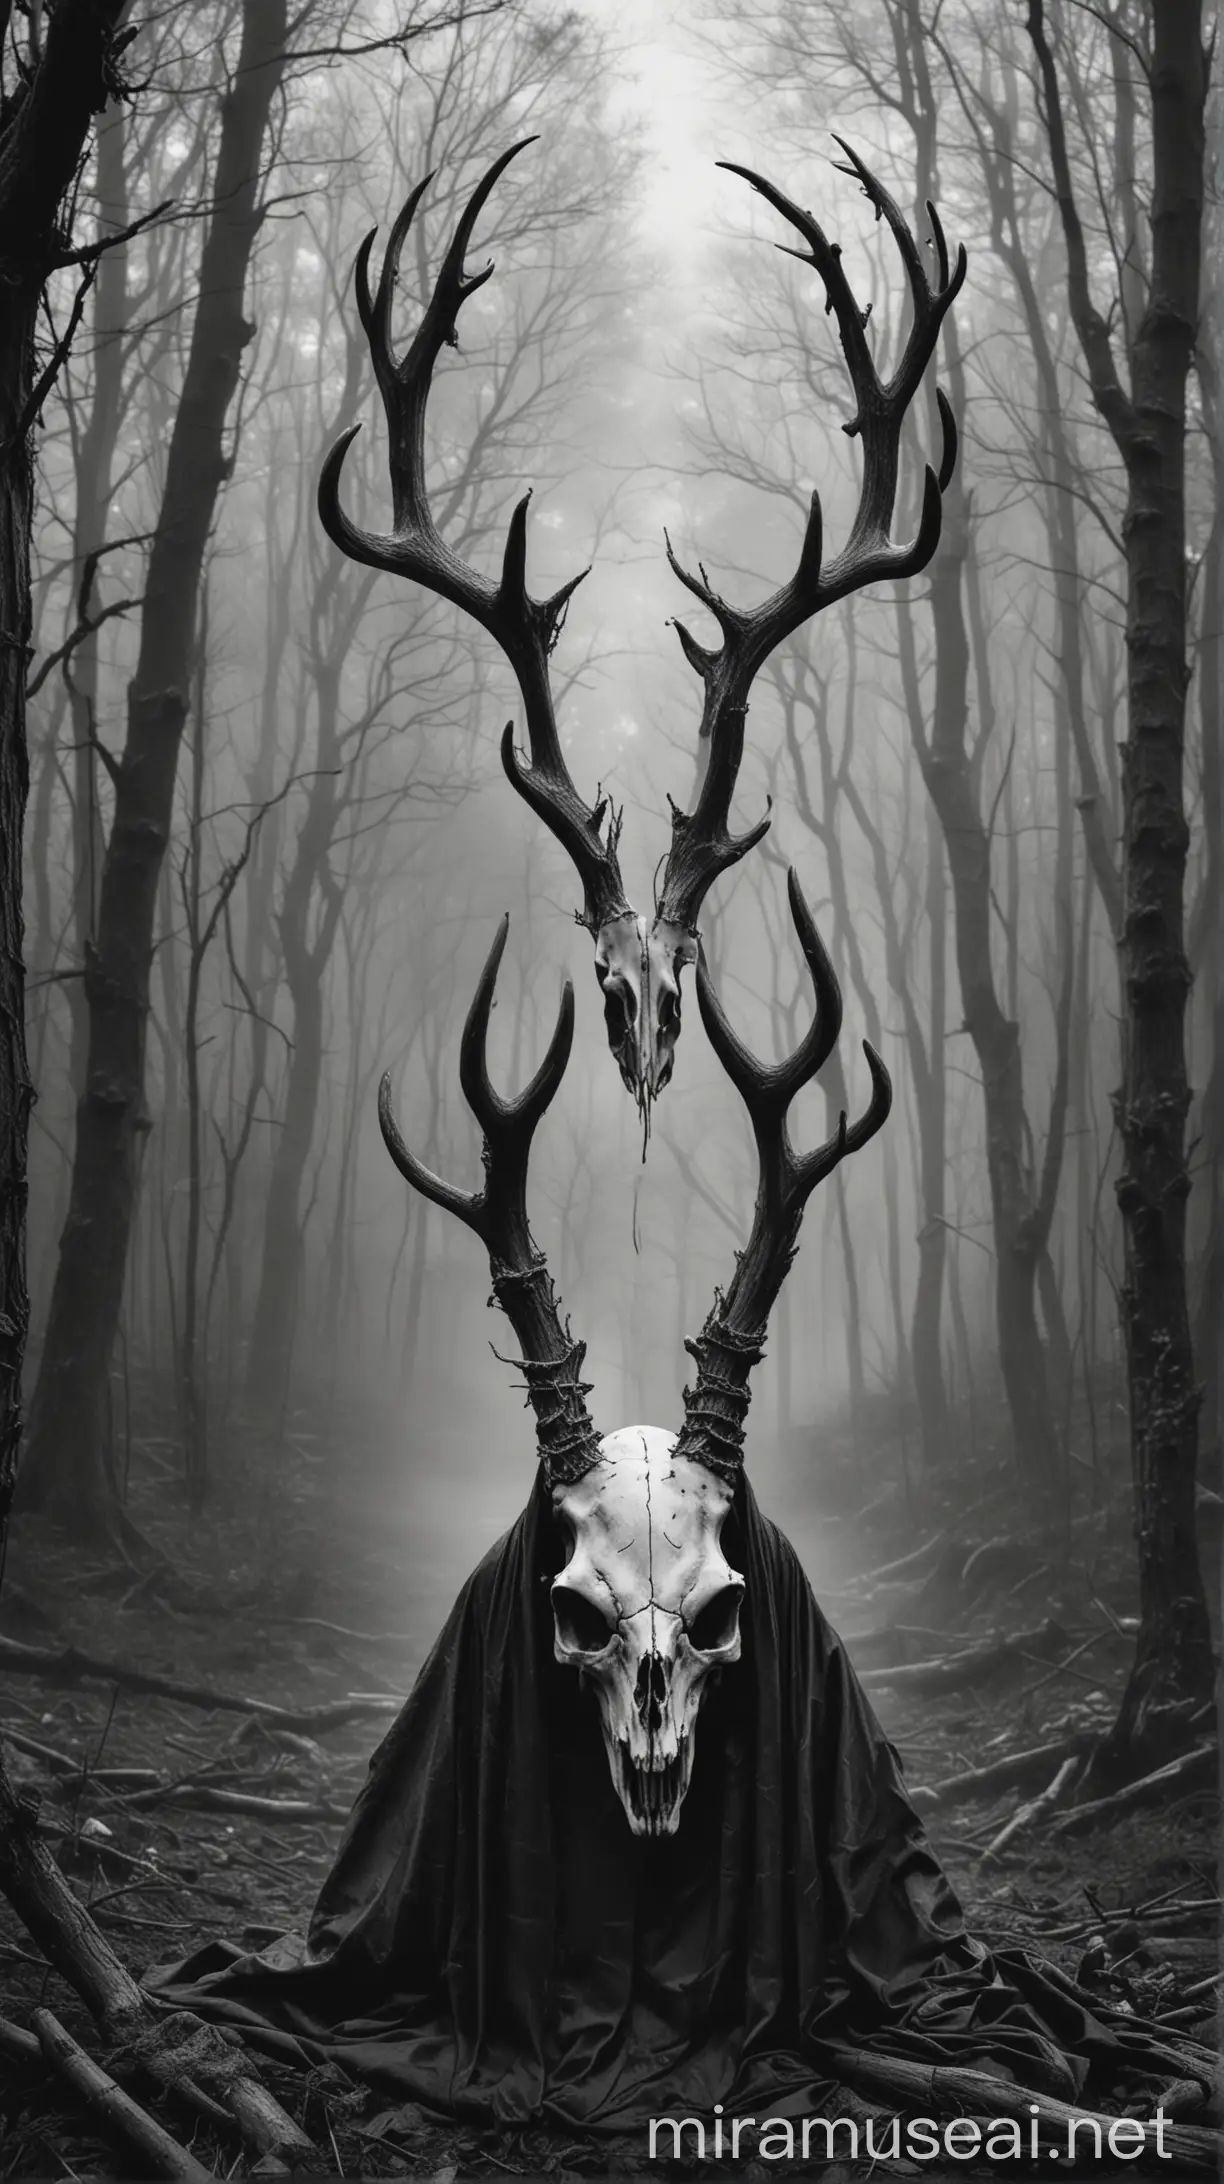 deer skull death in black robe made with black and white sketch in gloomy foggy dark forest 